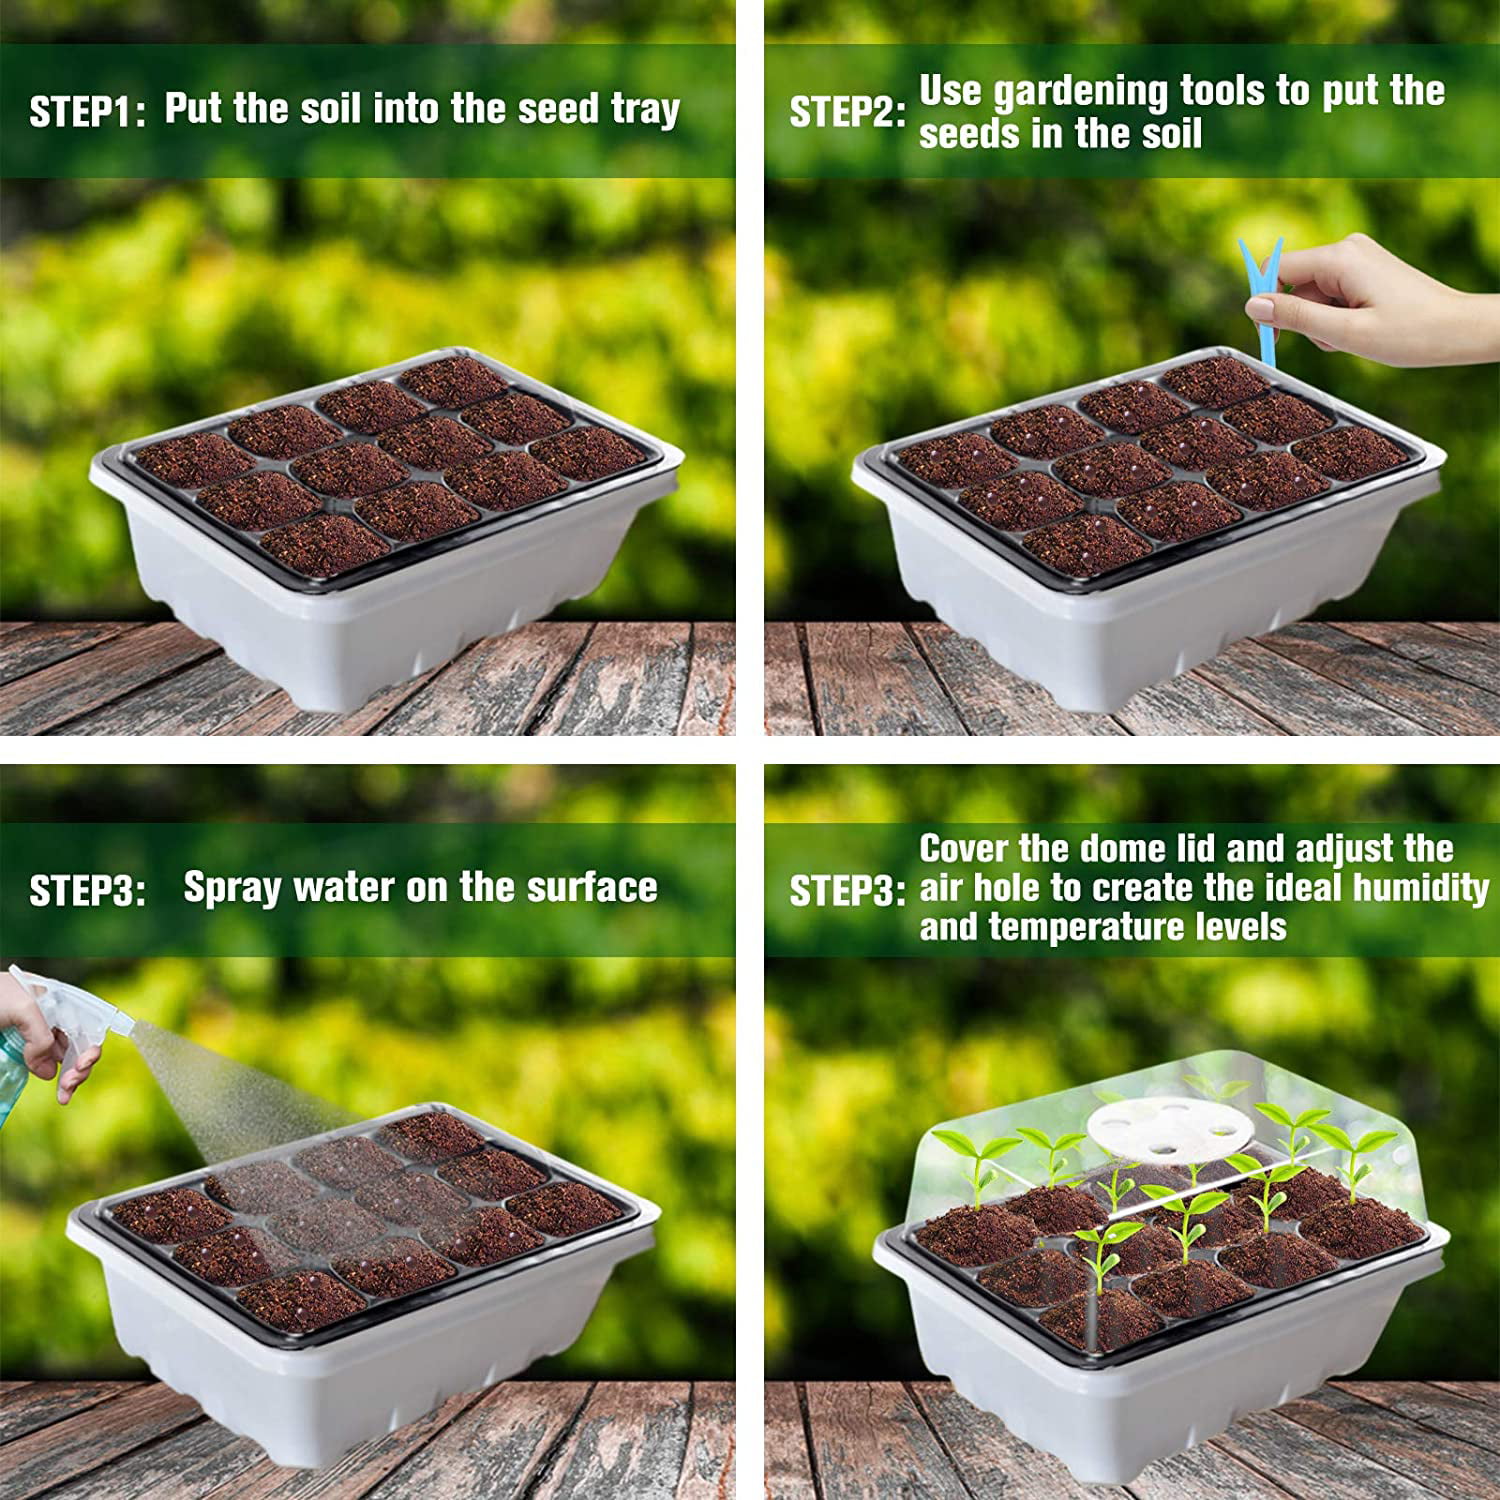 Details about   12x Seed Starter Tray 144 Cells Plant Germination Kit Garden Seed Starting Tool 